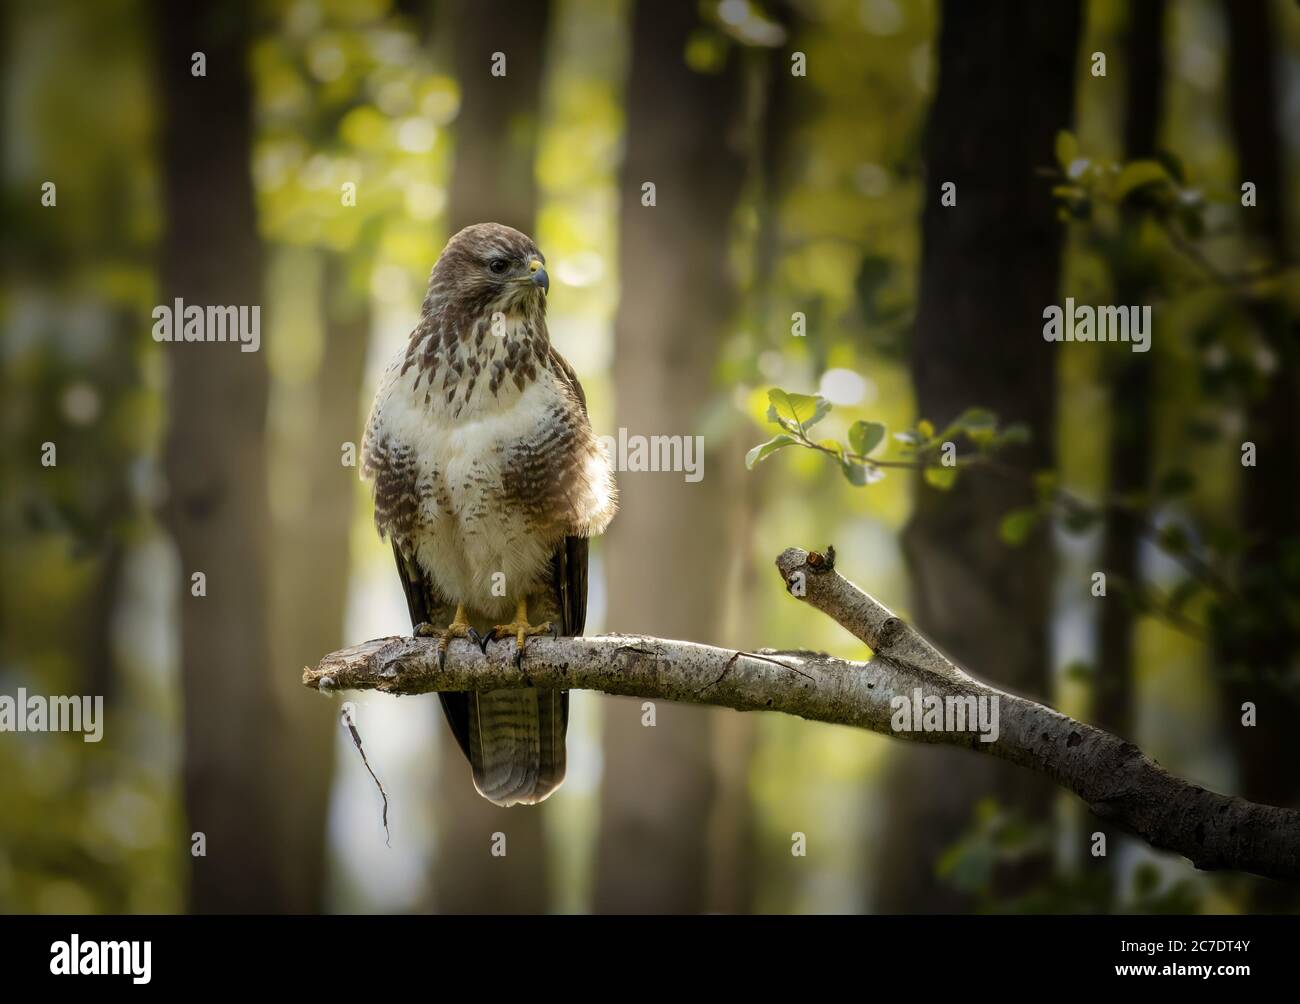 Closeup shot of an angry hawk standing on a tree branch in the forest Stock Photo